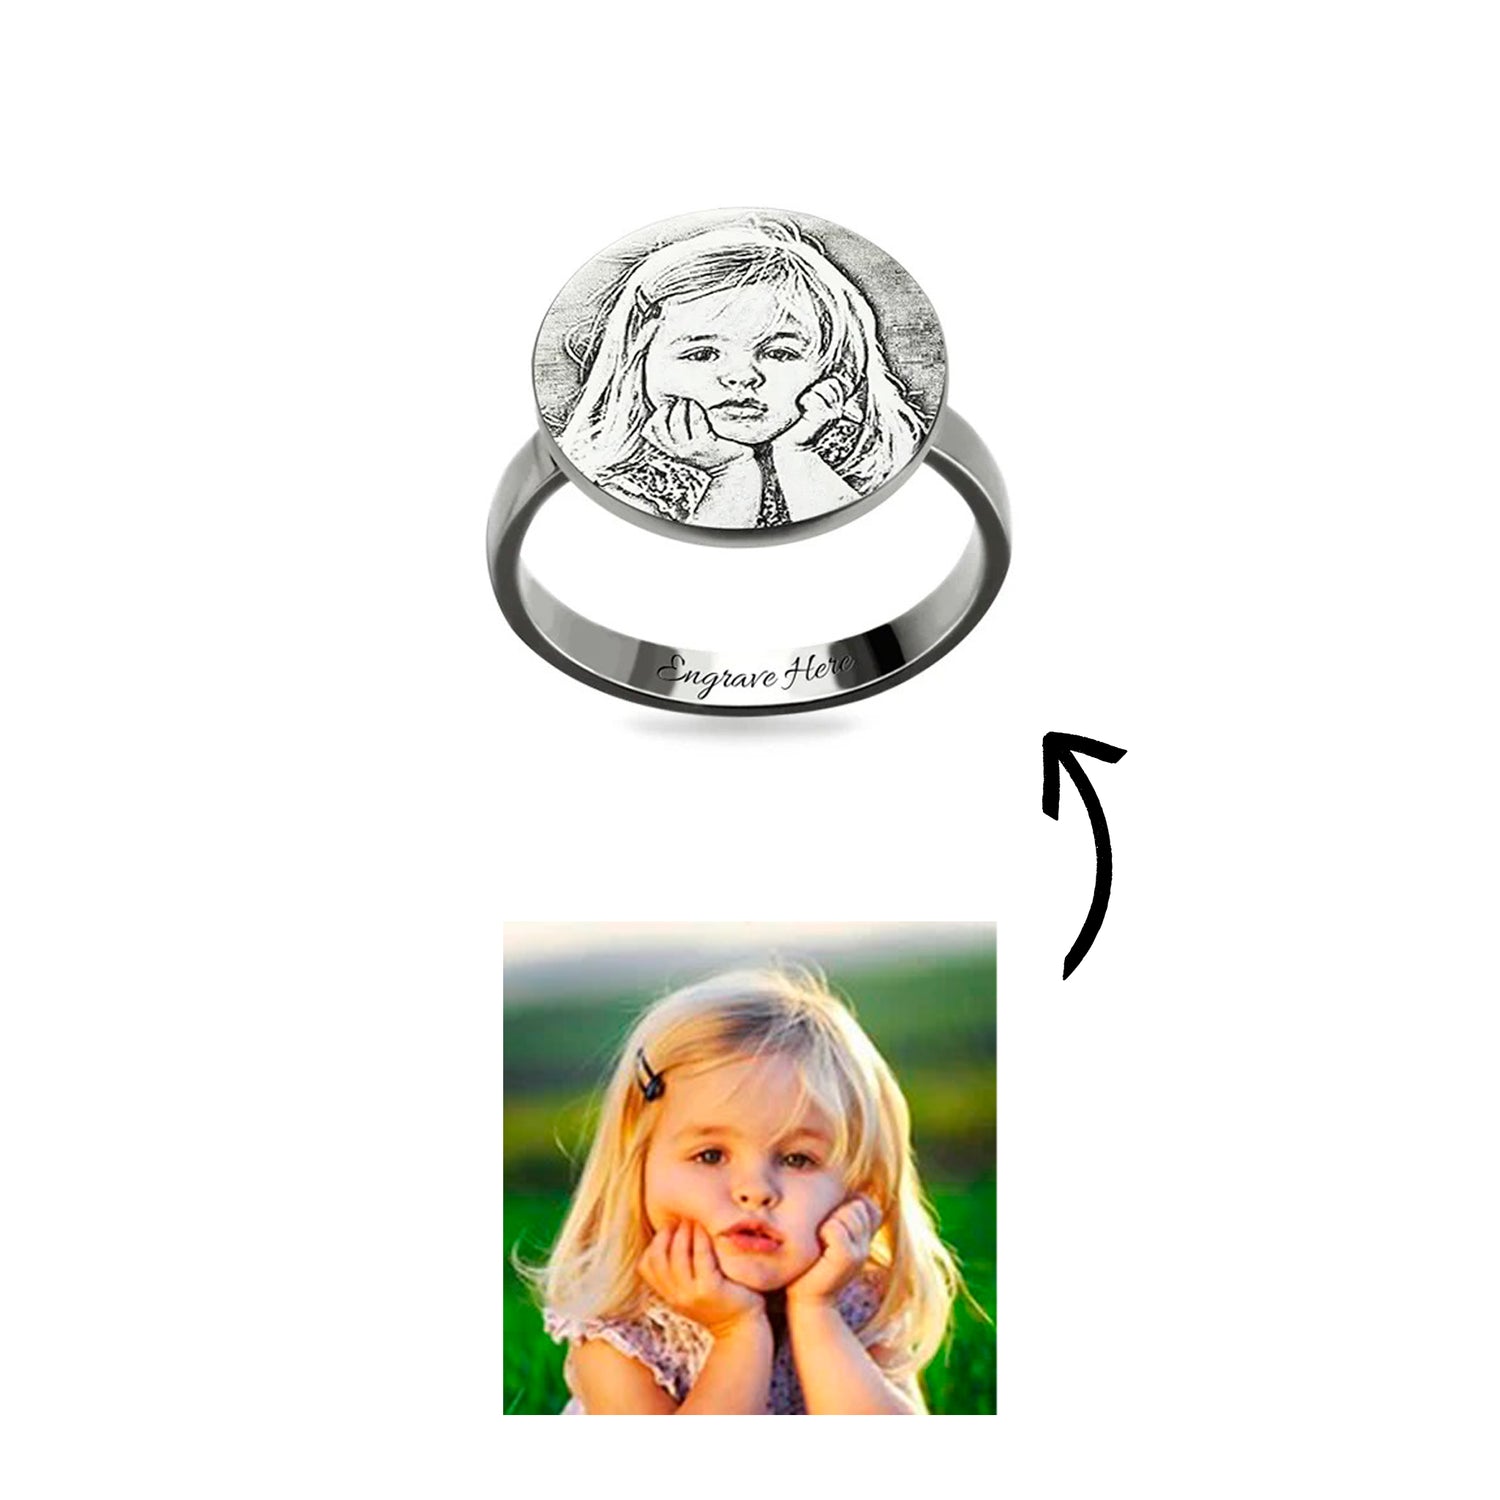 Photo Engraved Ring